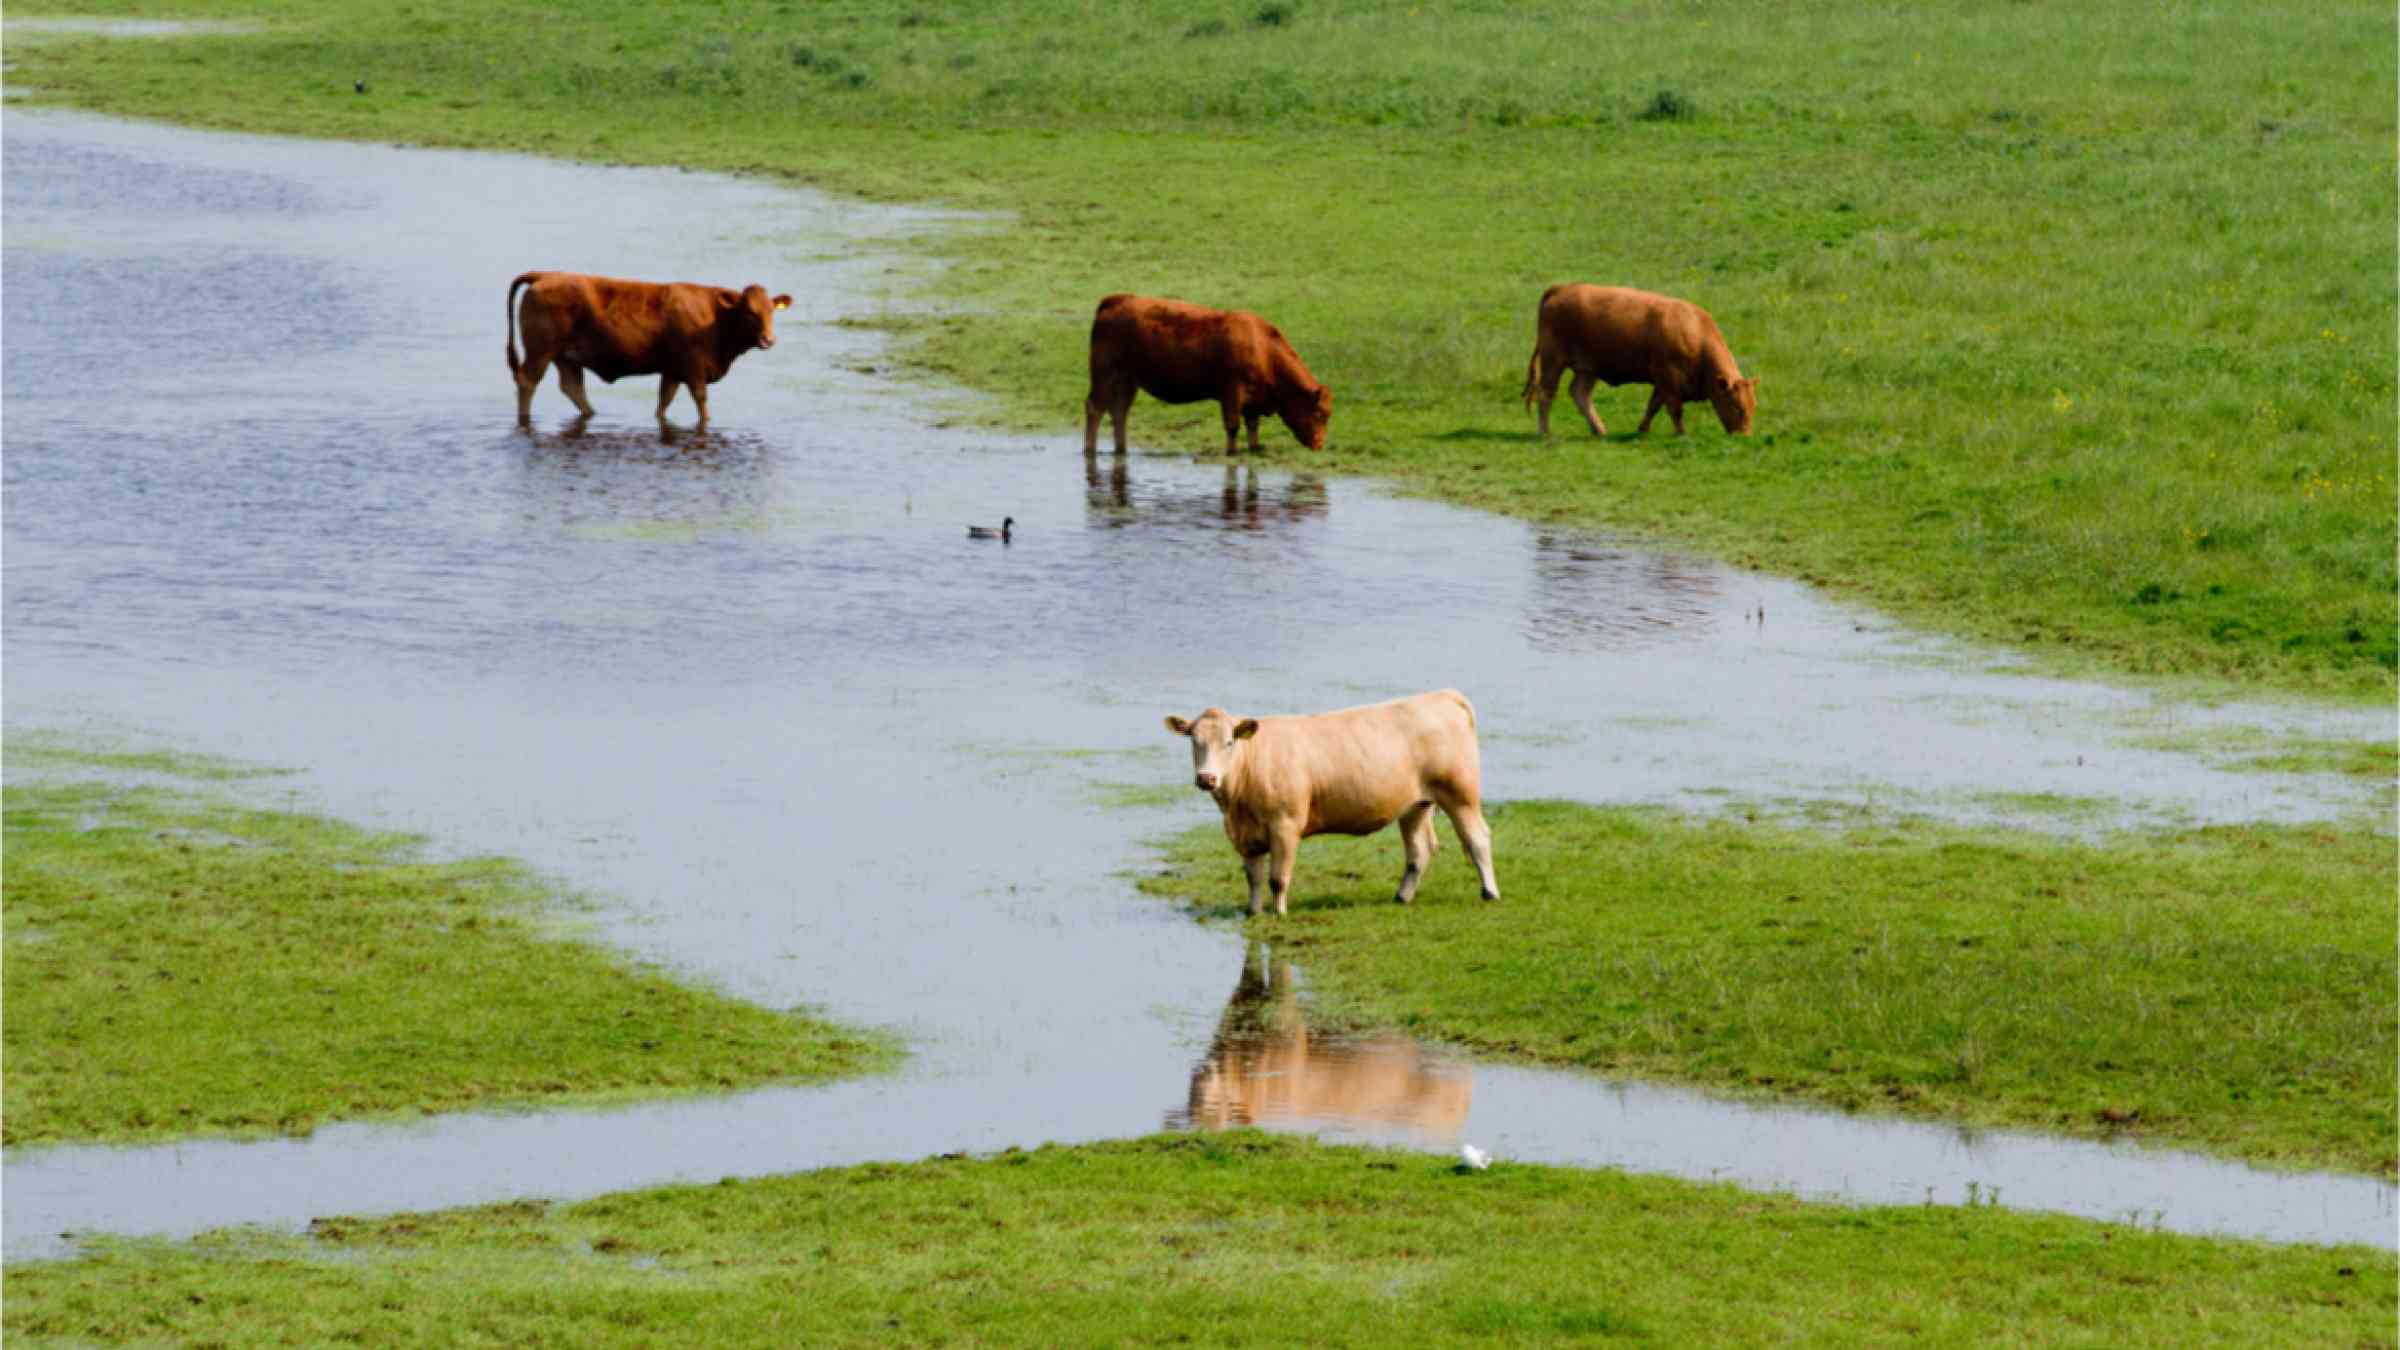 This image shows cows on flooded farmland.